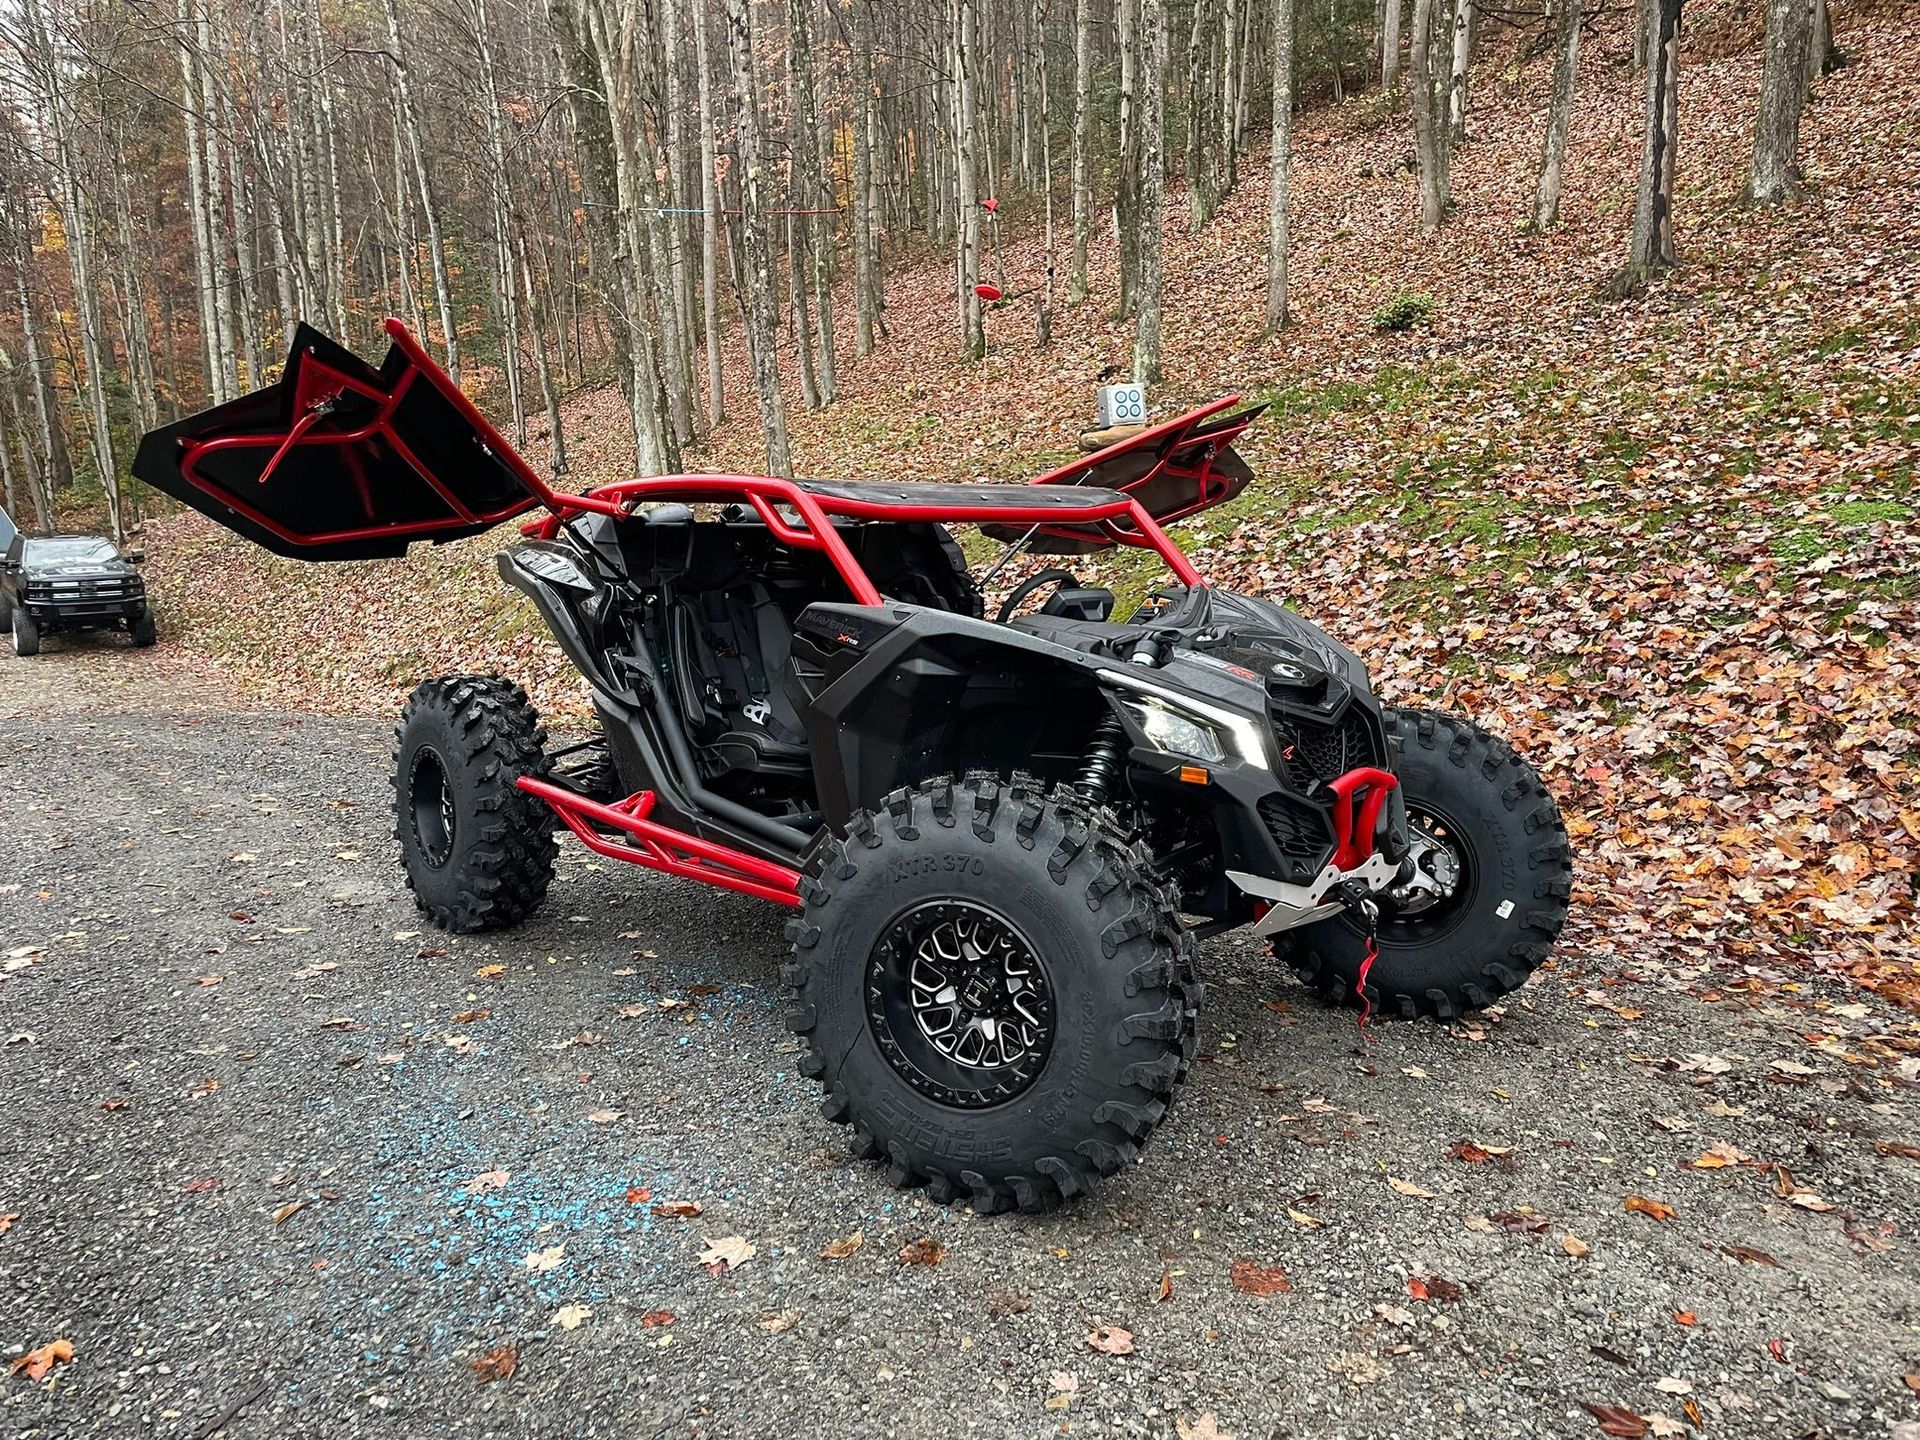 Canam X3 Cage